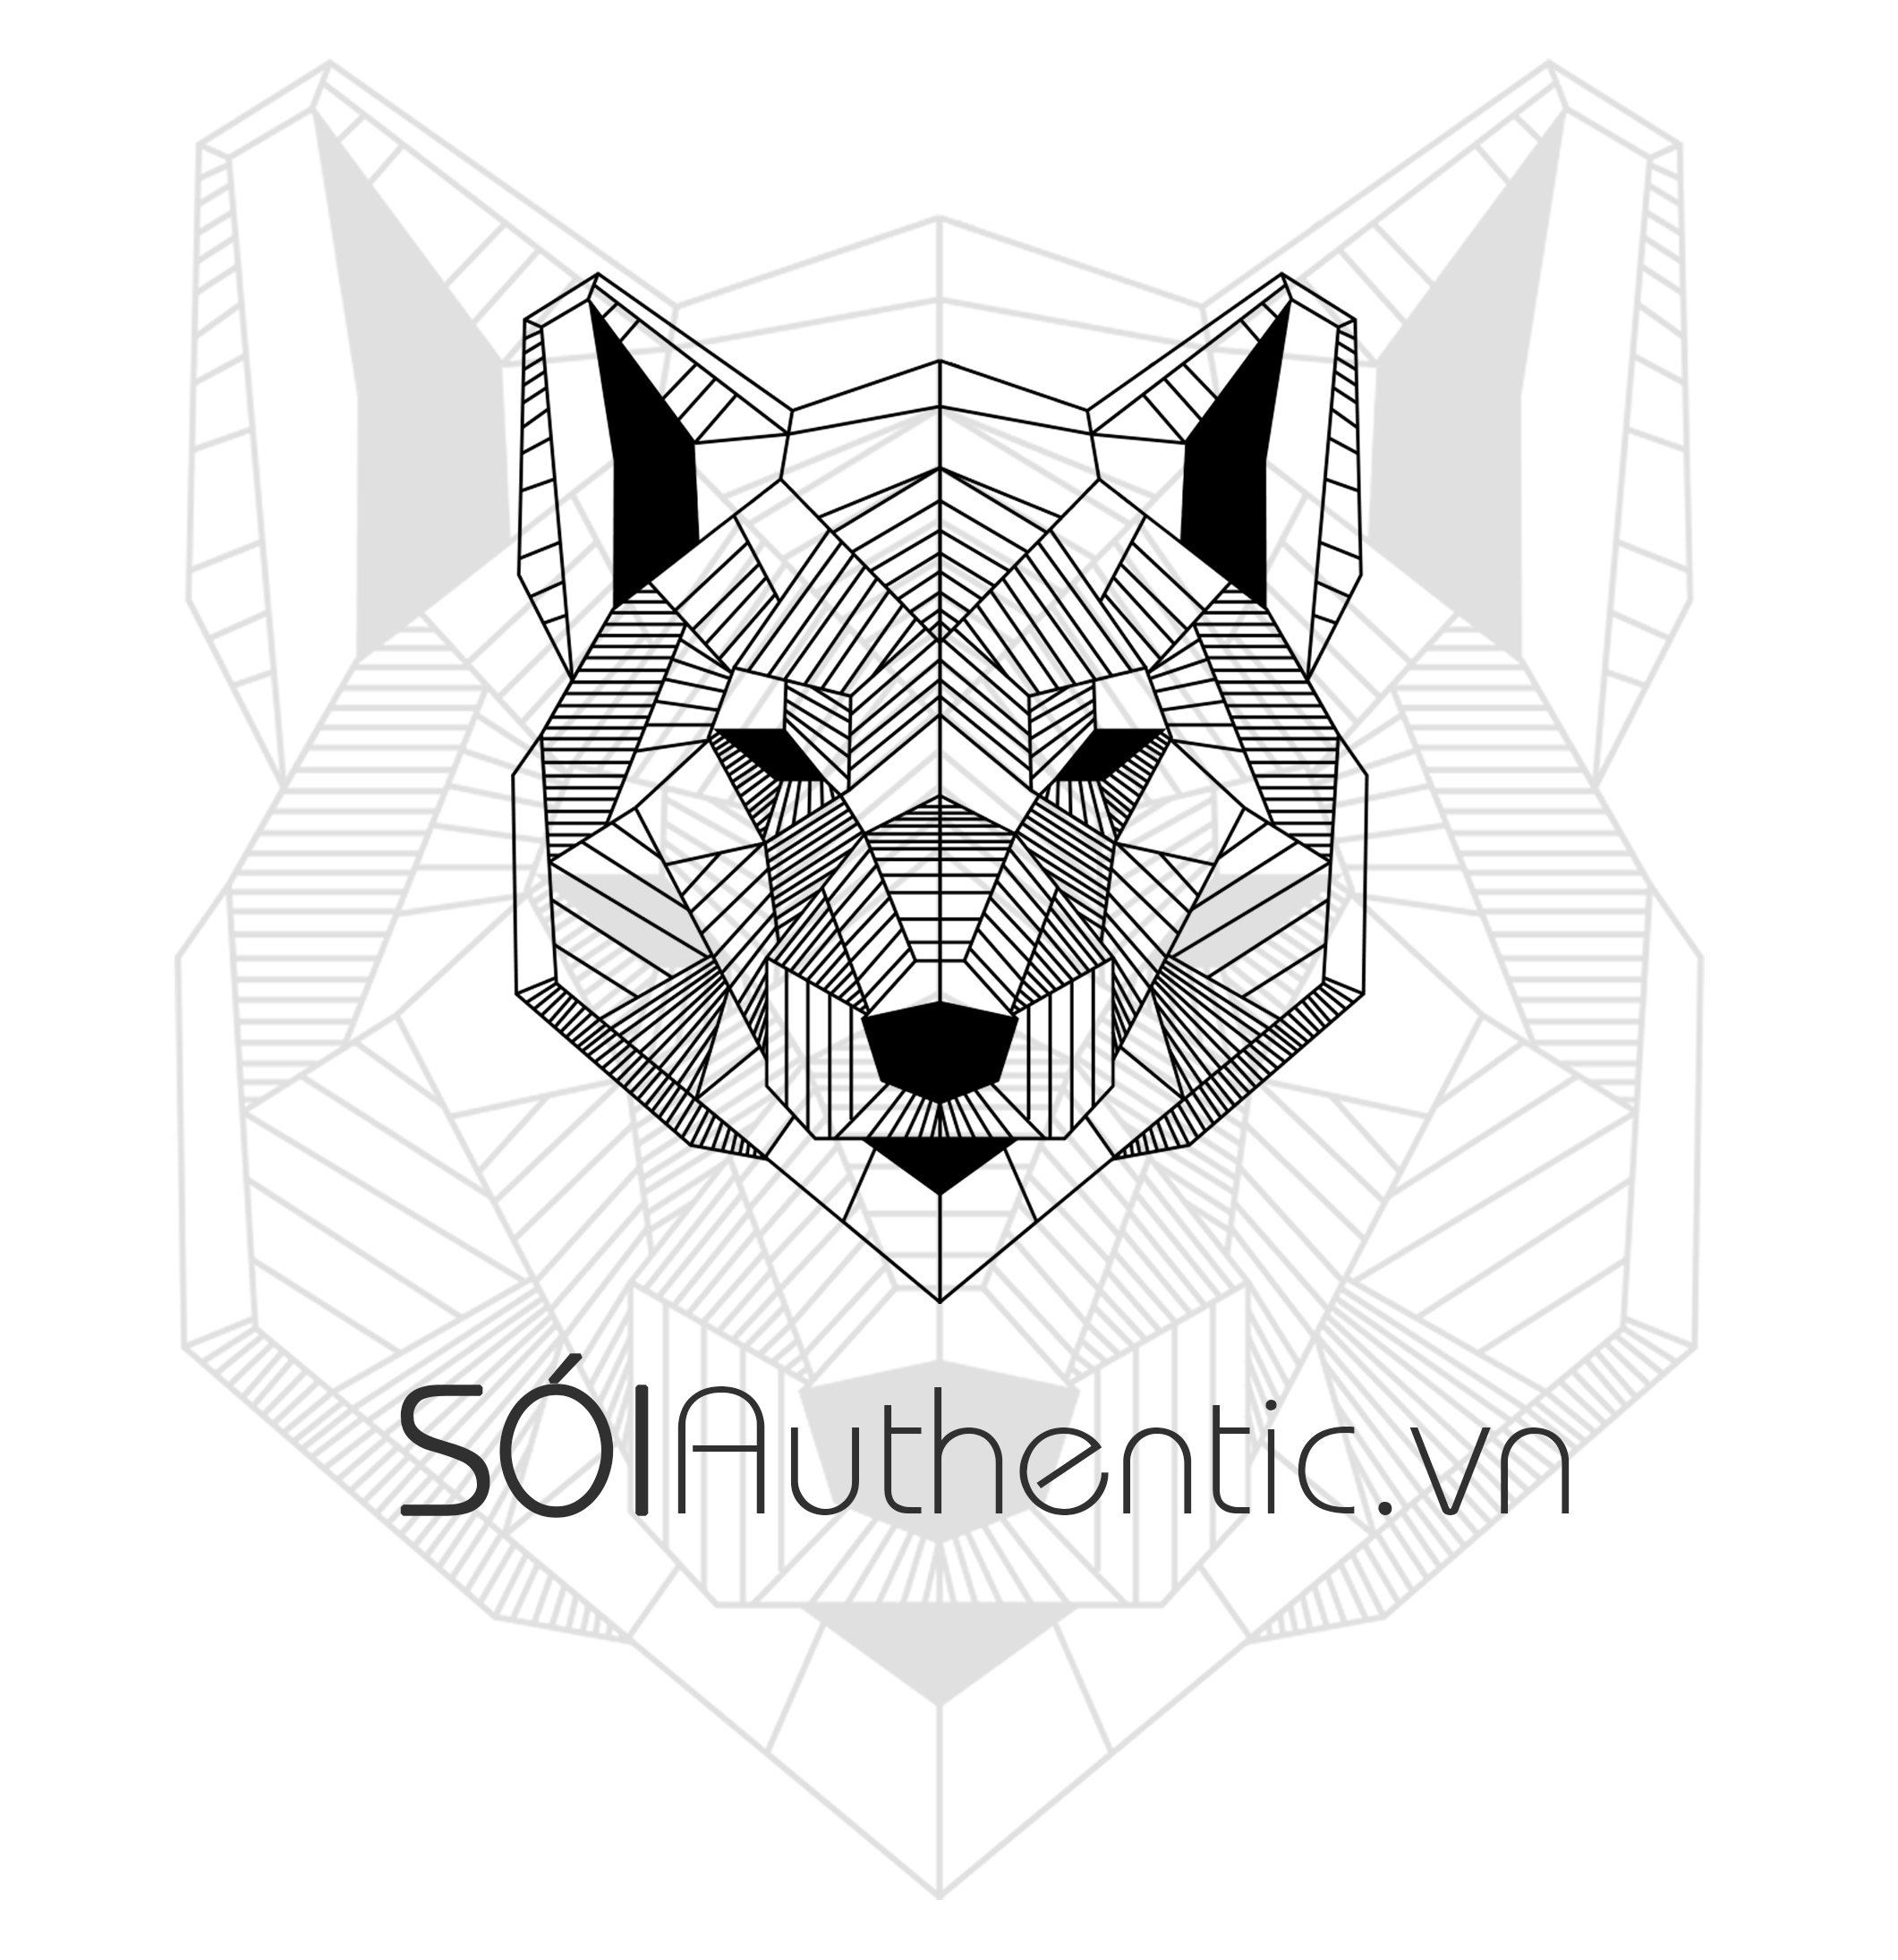 soiauthentic.vn